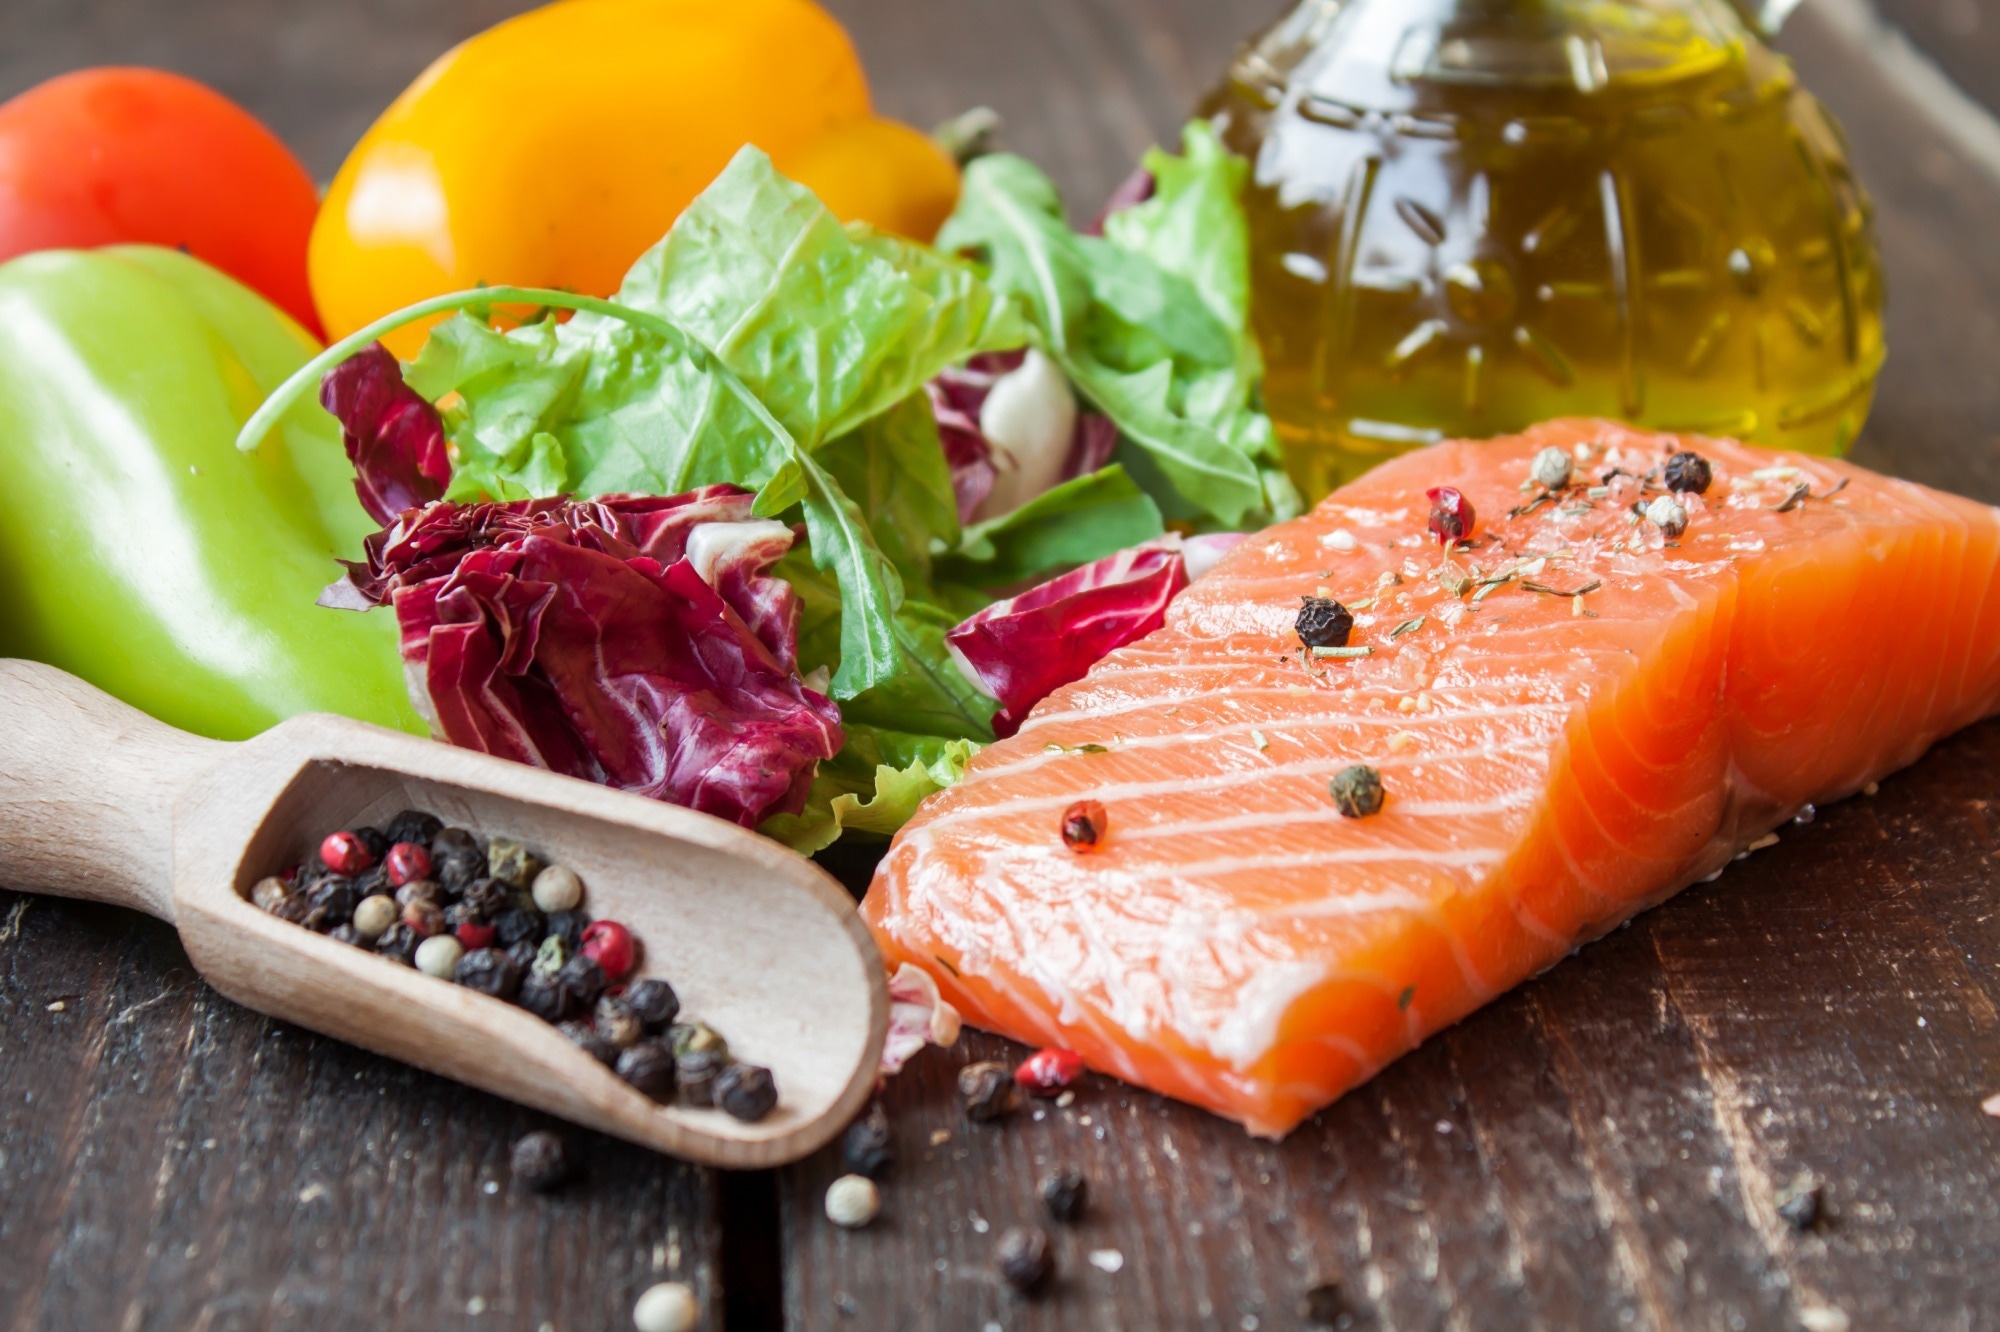 Better cognition and academic performance are associated with Mediterranean diet adherence